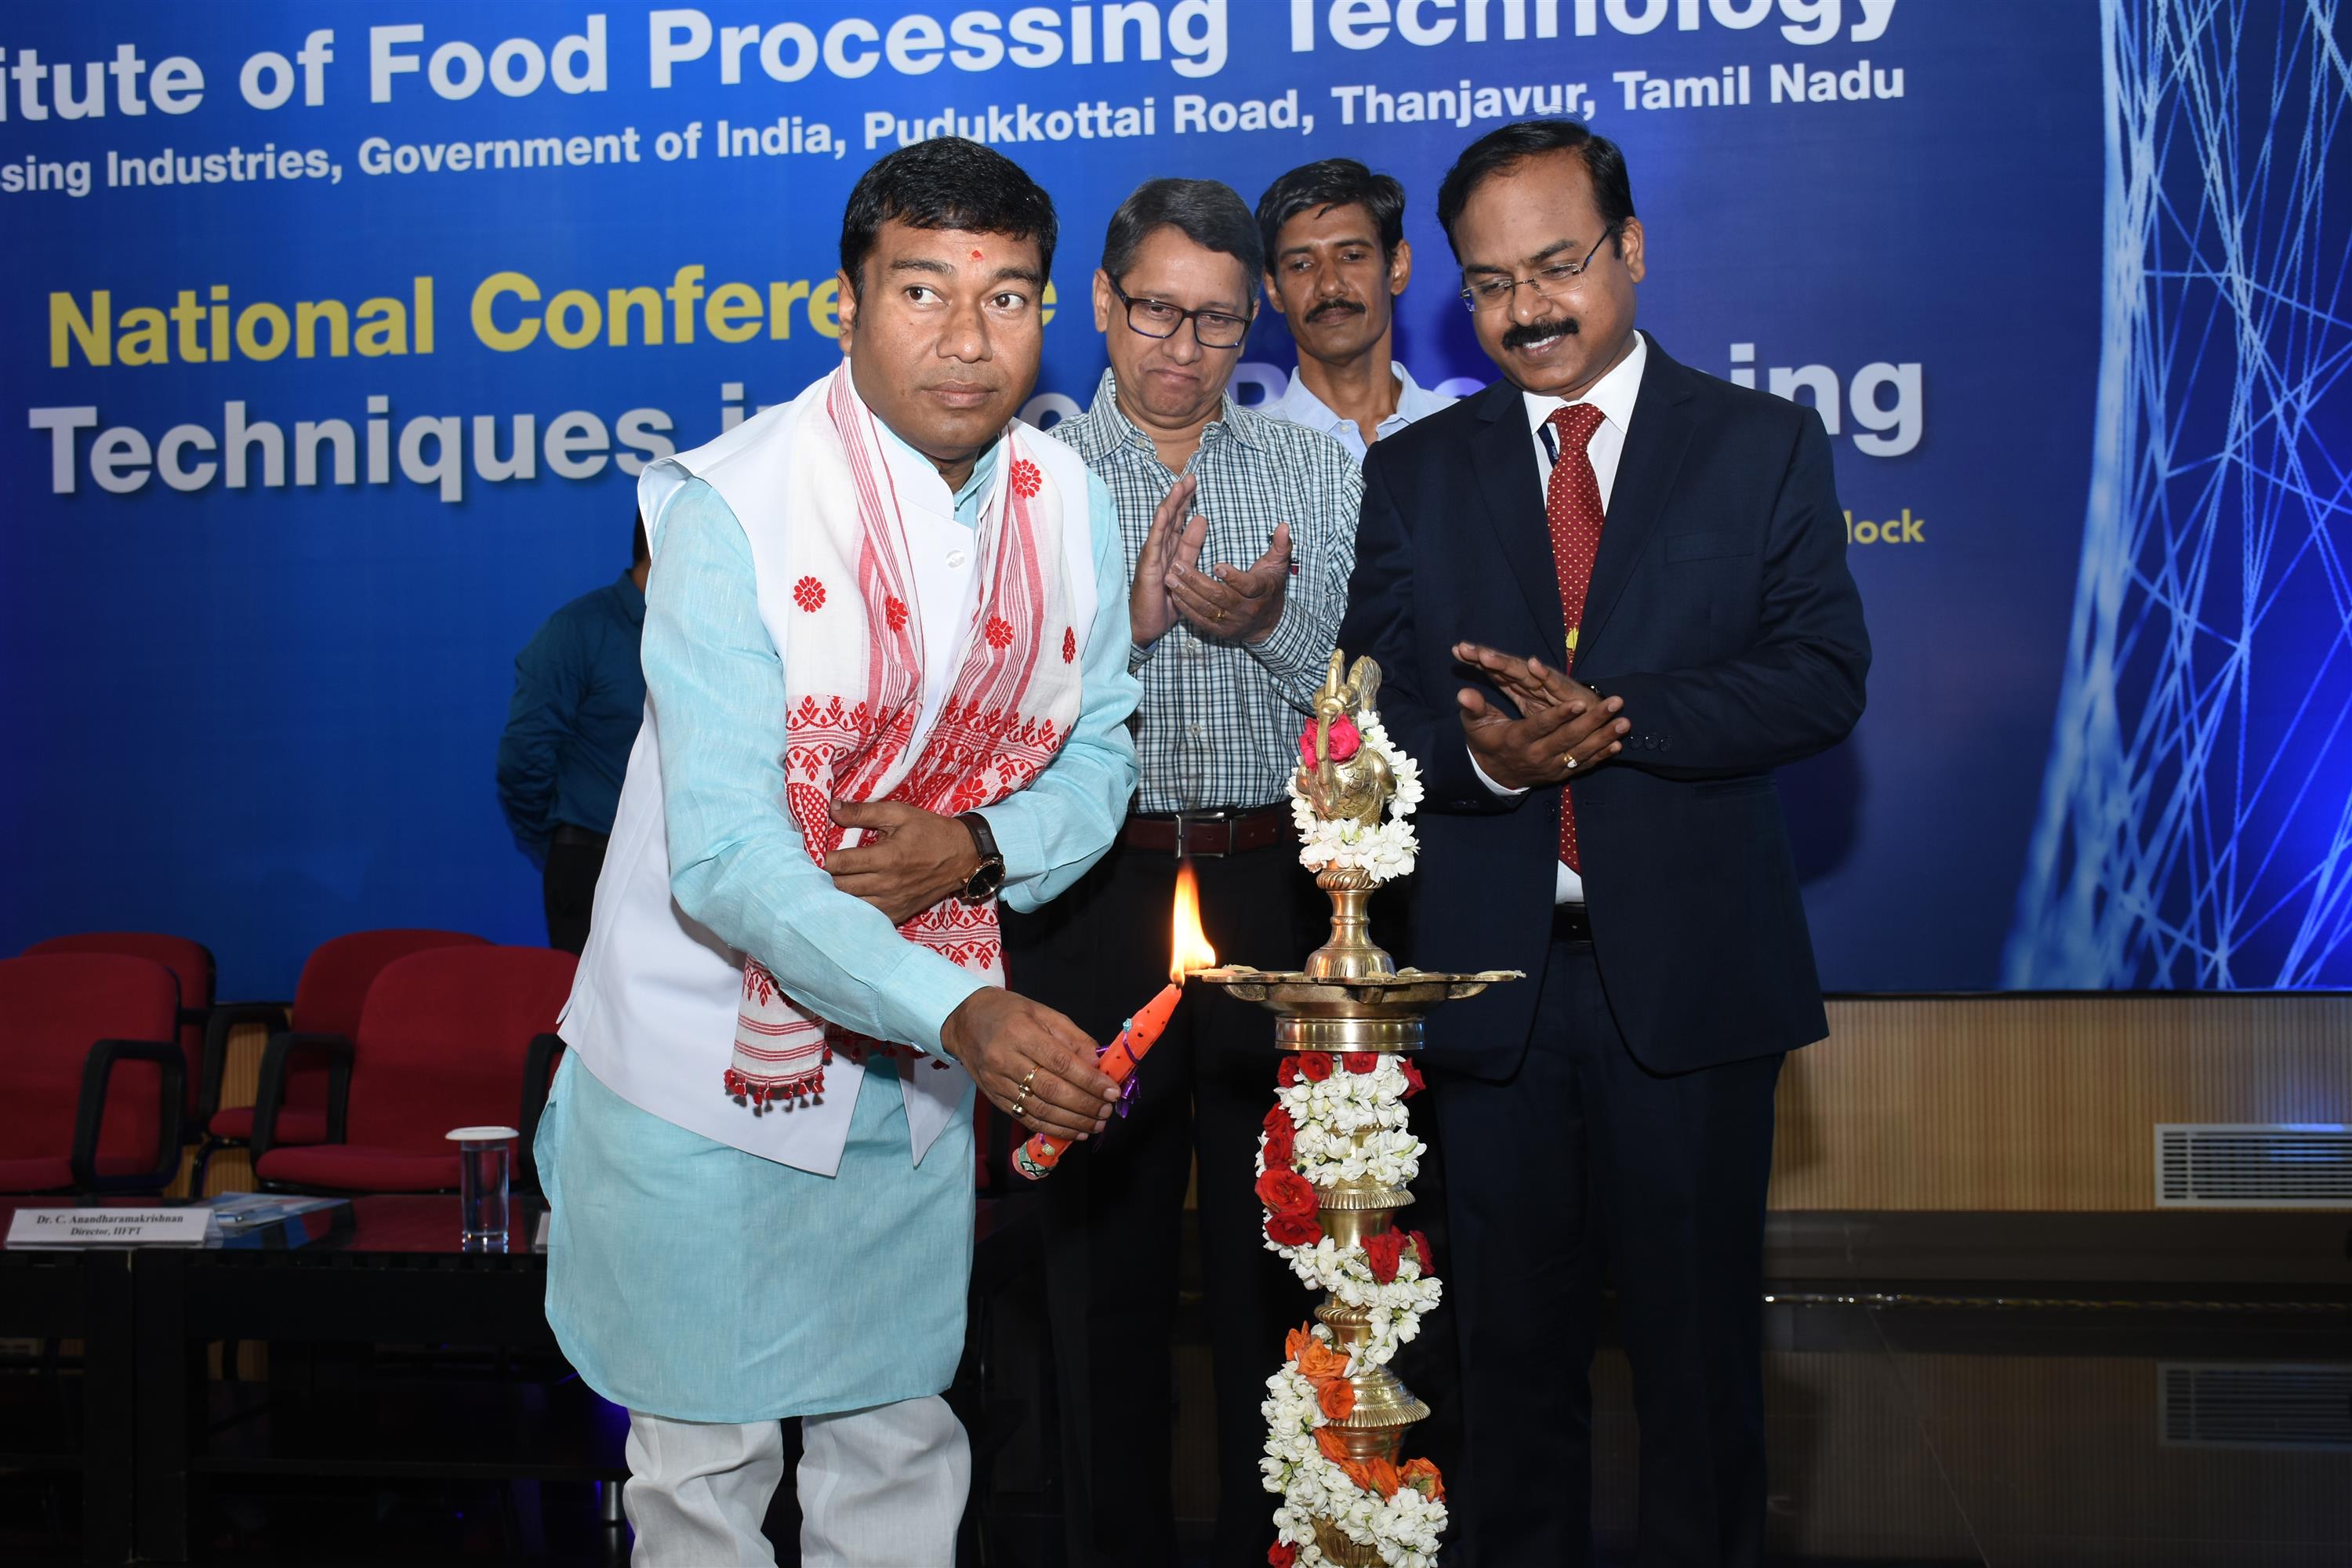 Shri Rameswar Teli, Union Minister of State for Food Processing Industries is inaugurating the National Conference on Emerging Techniques in Food Processing organized by the Indian Institute of Food Processing Technology (IIFPT) in Thanjavur today (28.06.2019). 